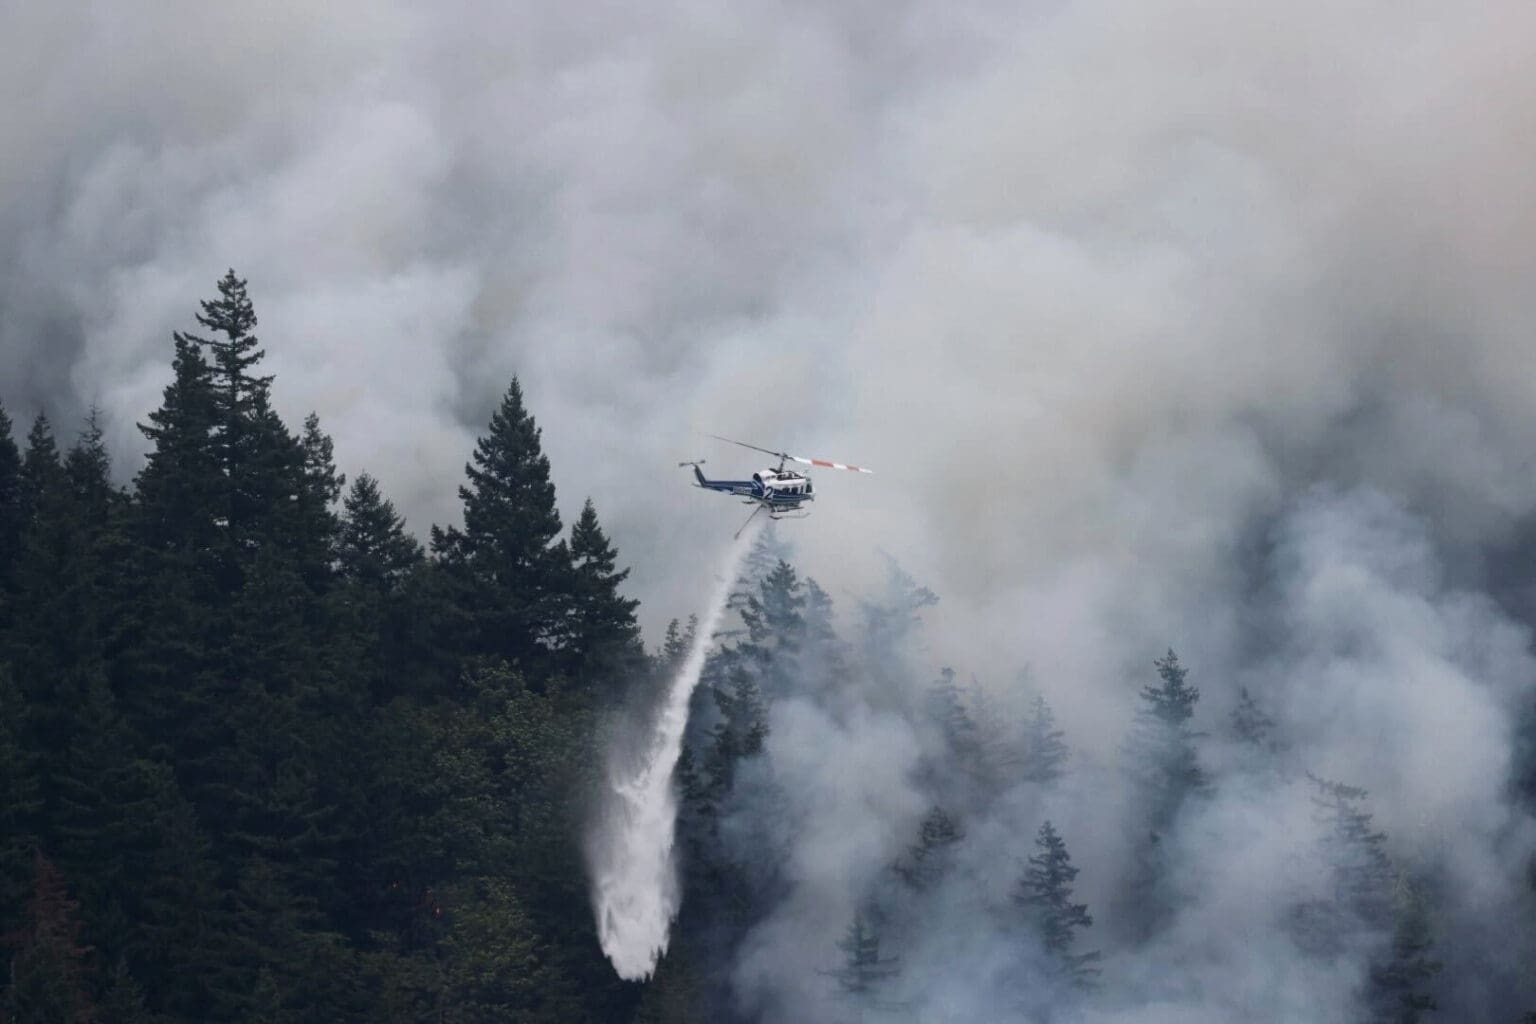 A helicopter drops water on the fire before 10 a.m. Tuesday